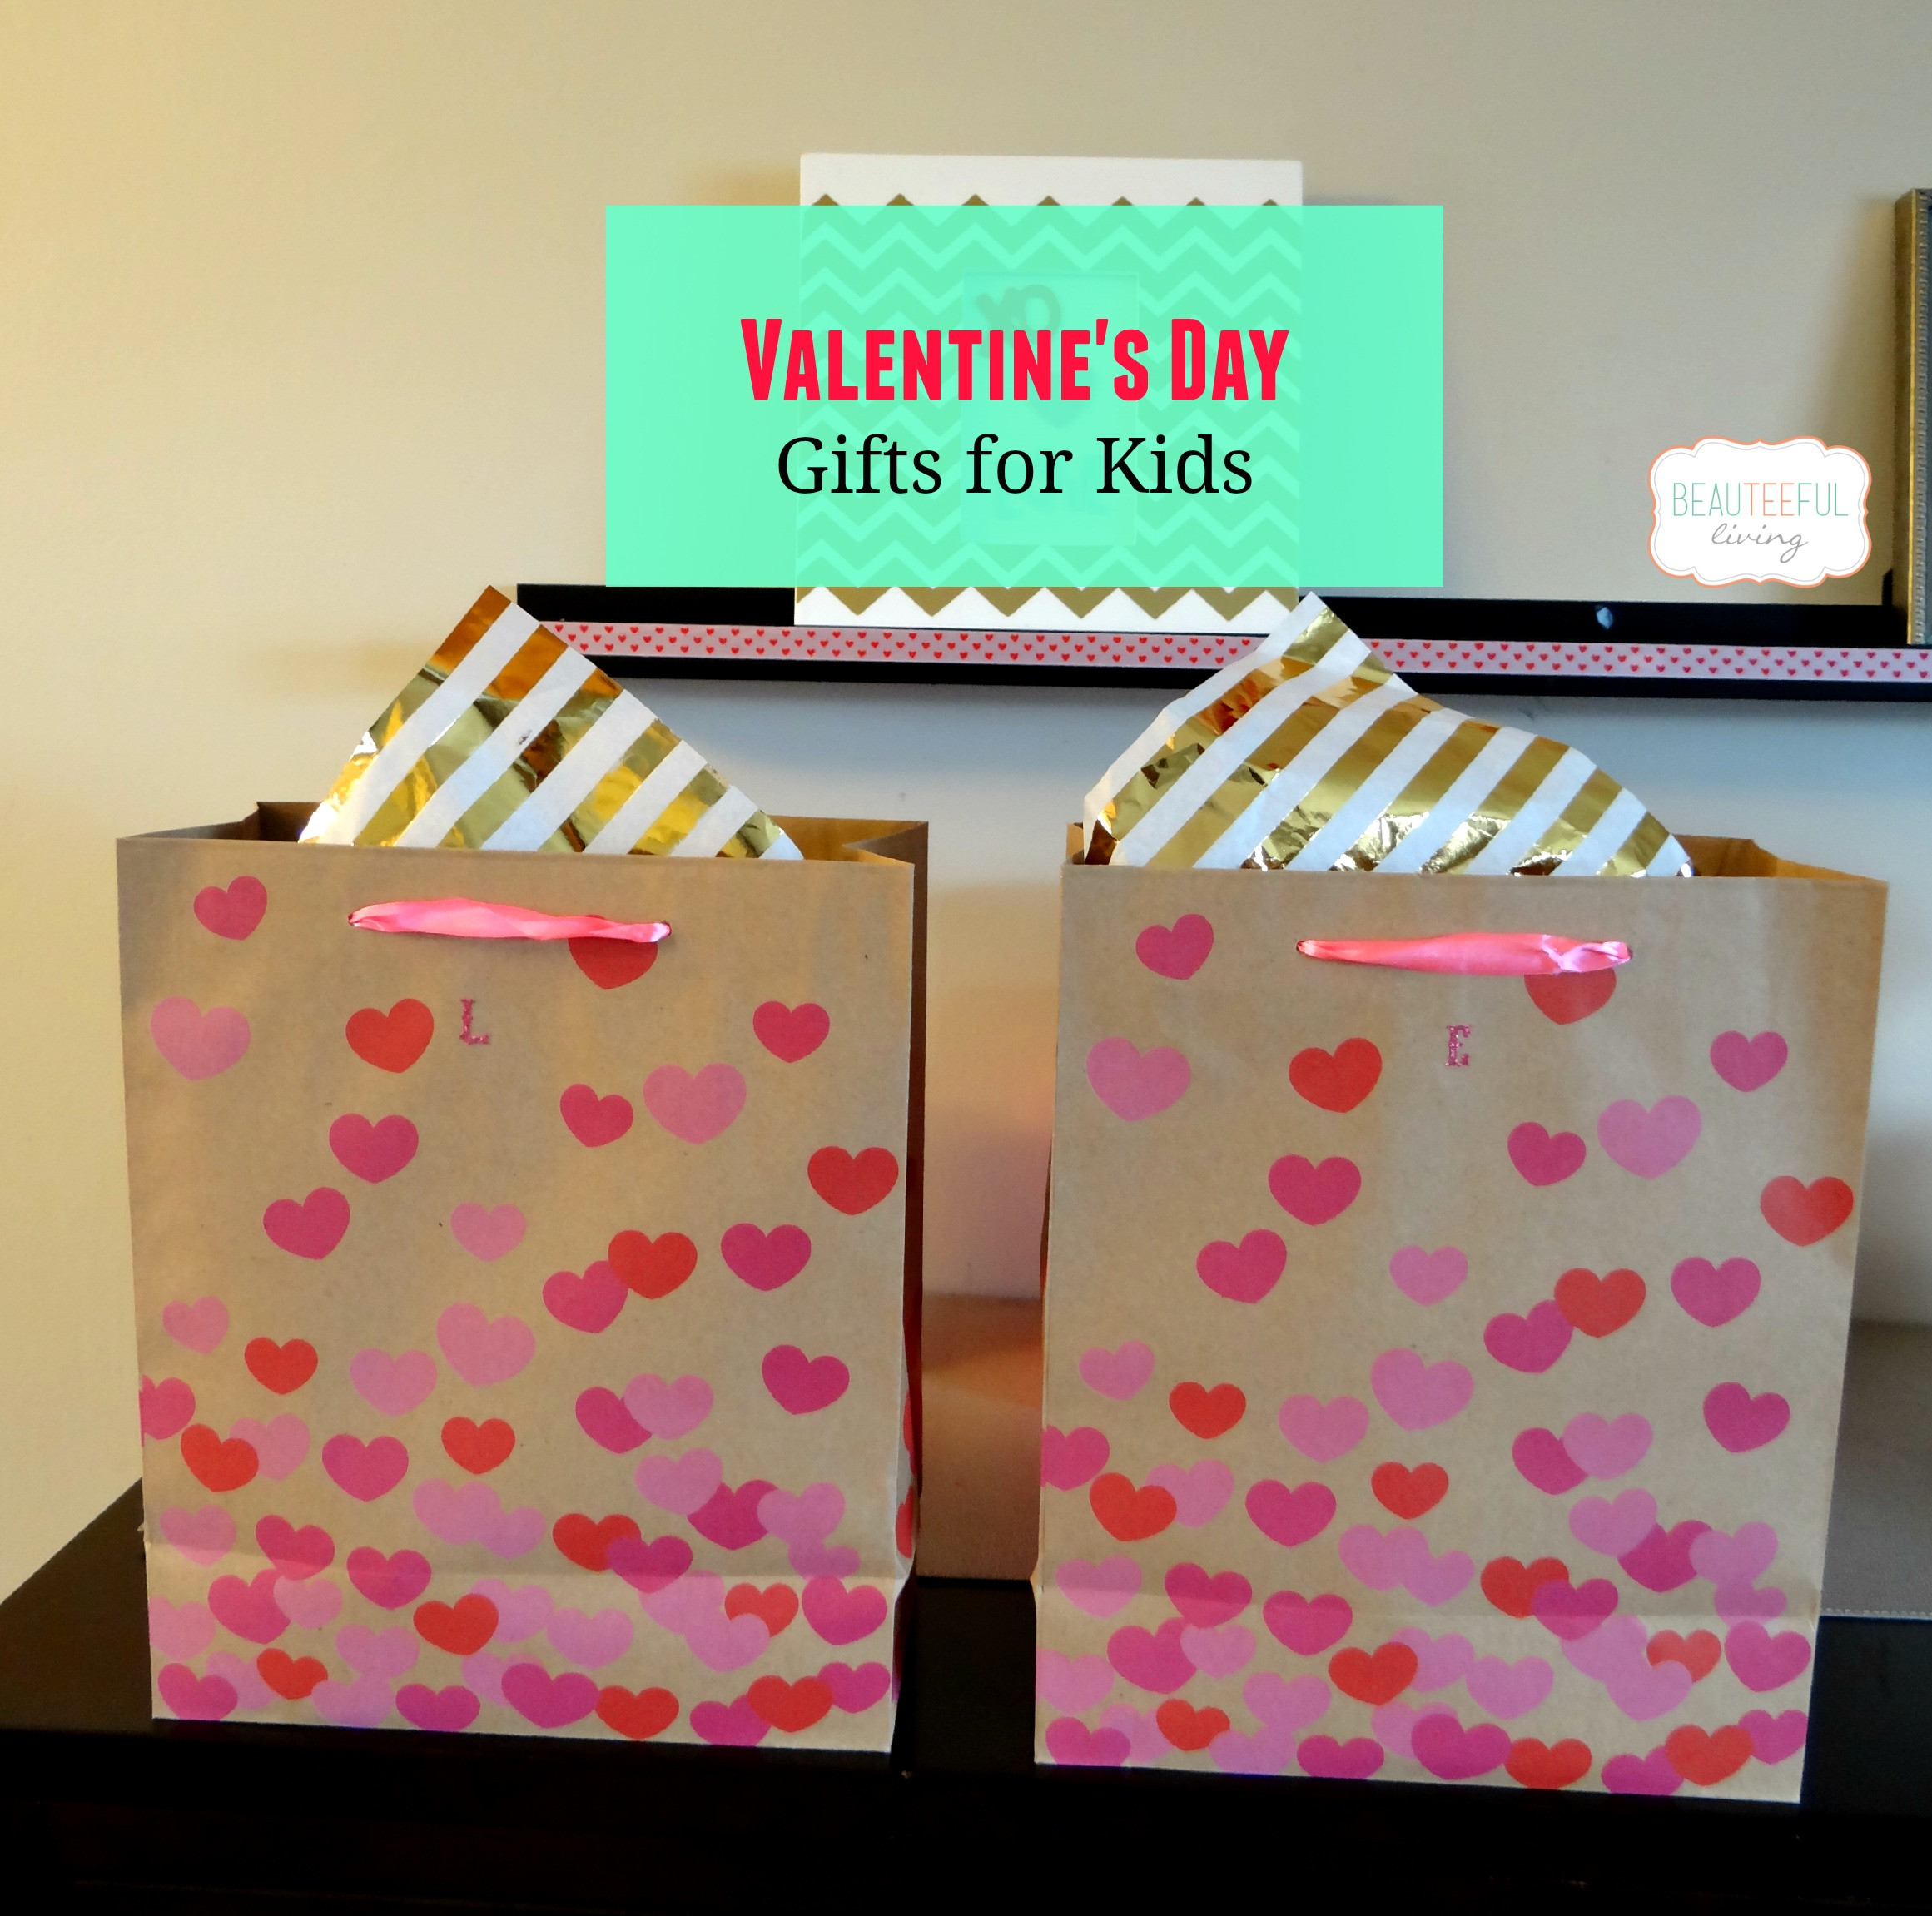 Kid Valentines Day Gifts
 Valentine s Day Gifts for Kids BEAUTEEFUL Living